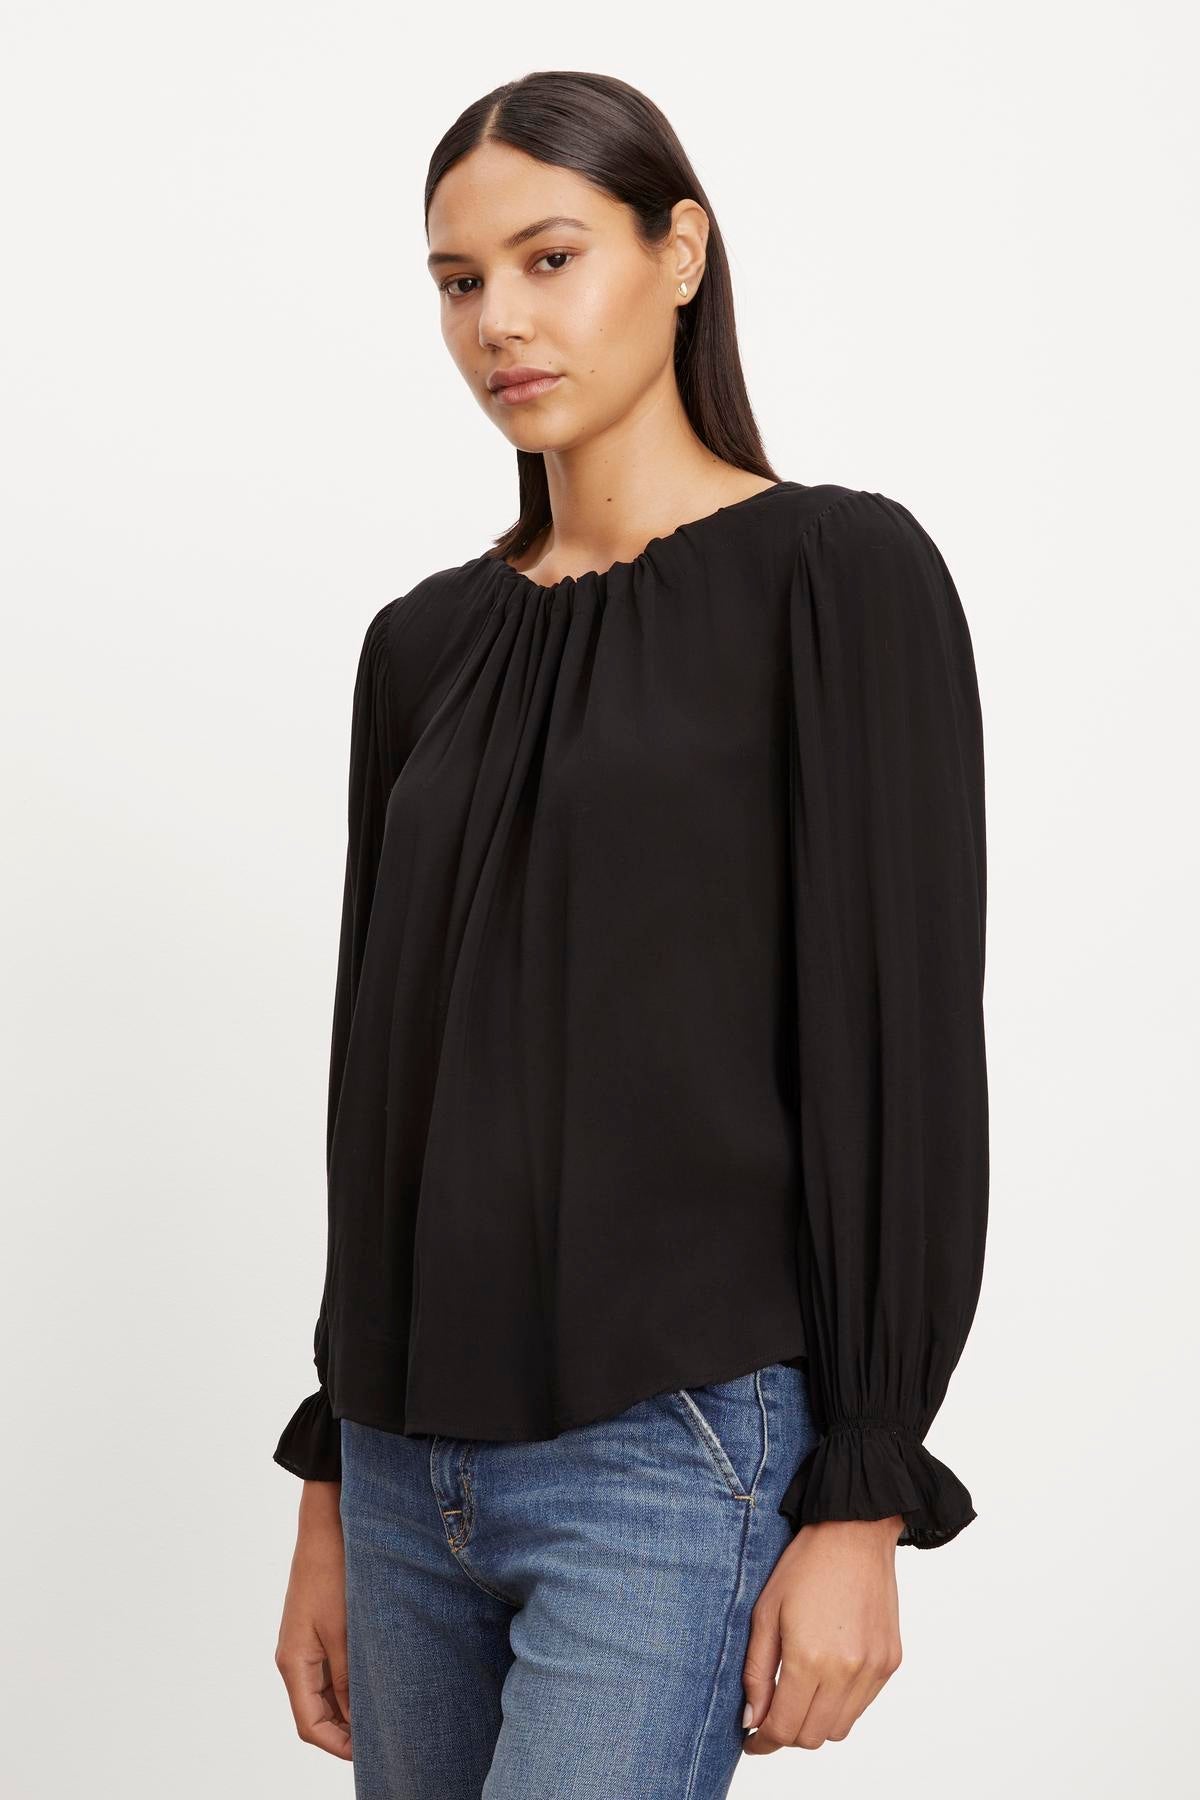 Luxurious BRISTOL NECK TIE TOP blouse made of rayon challis fabric, by Velvet by Graham & Spencer.-36001351106753